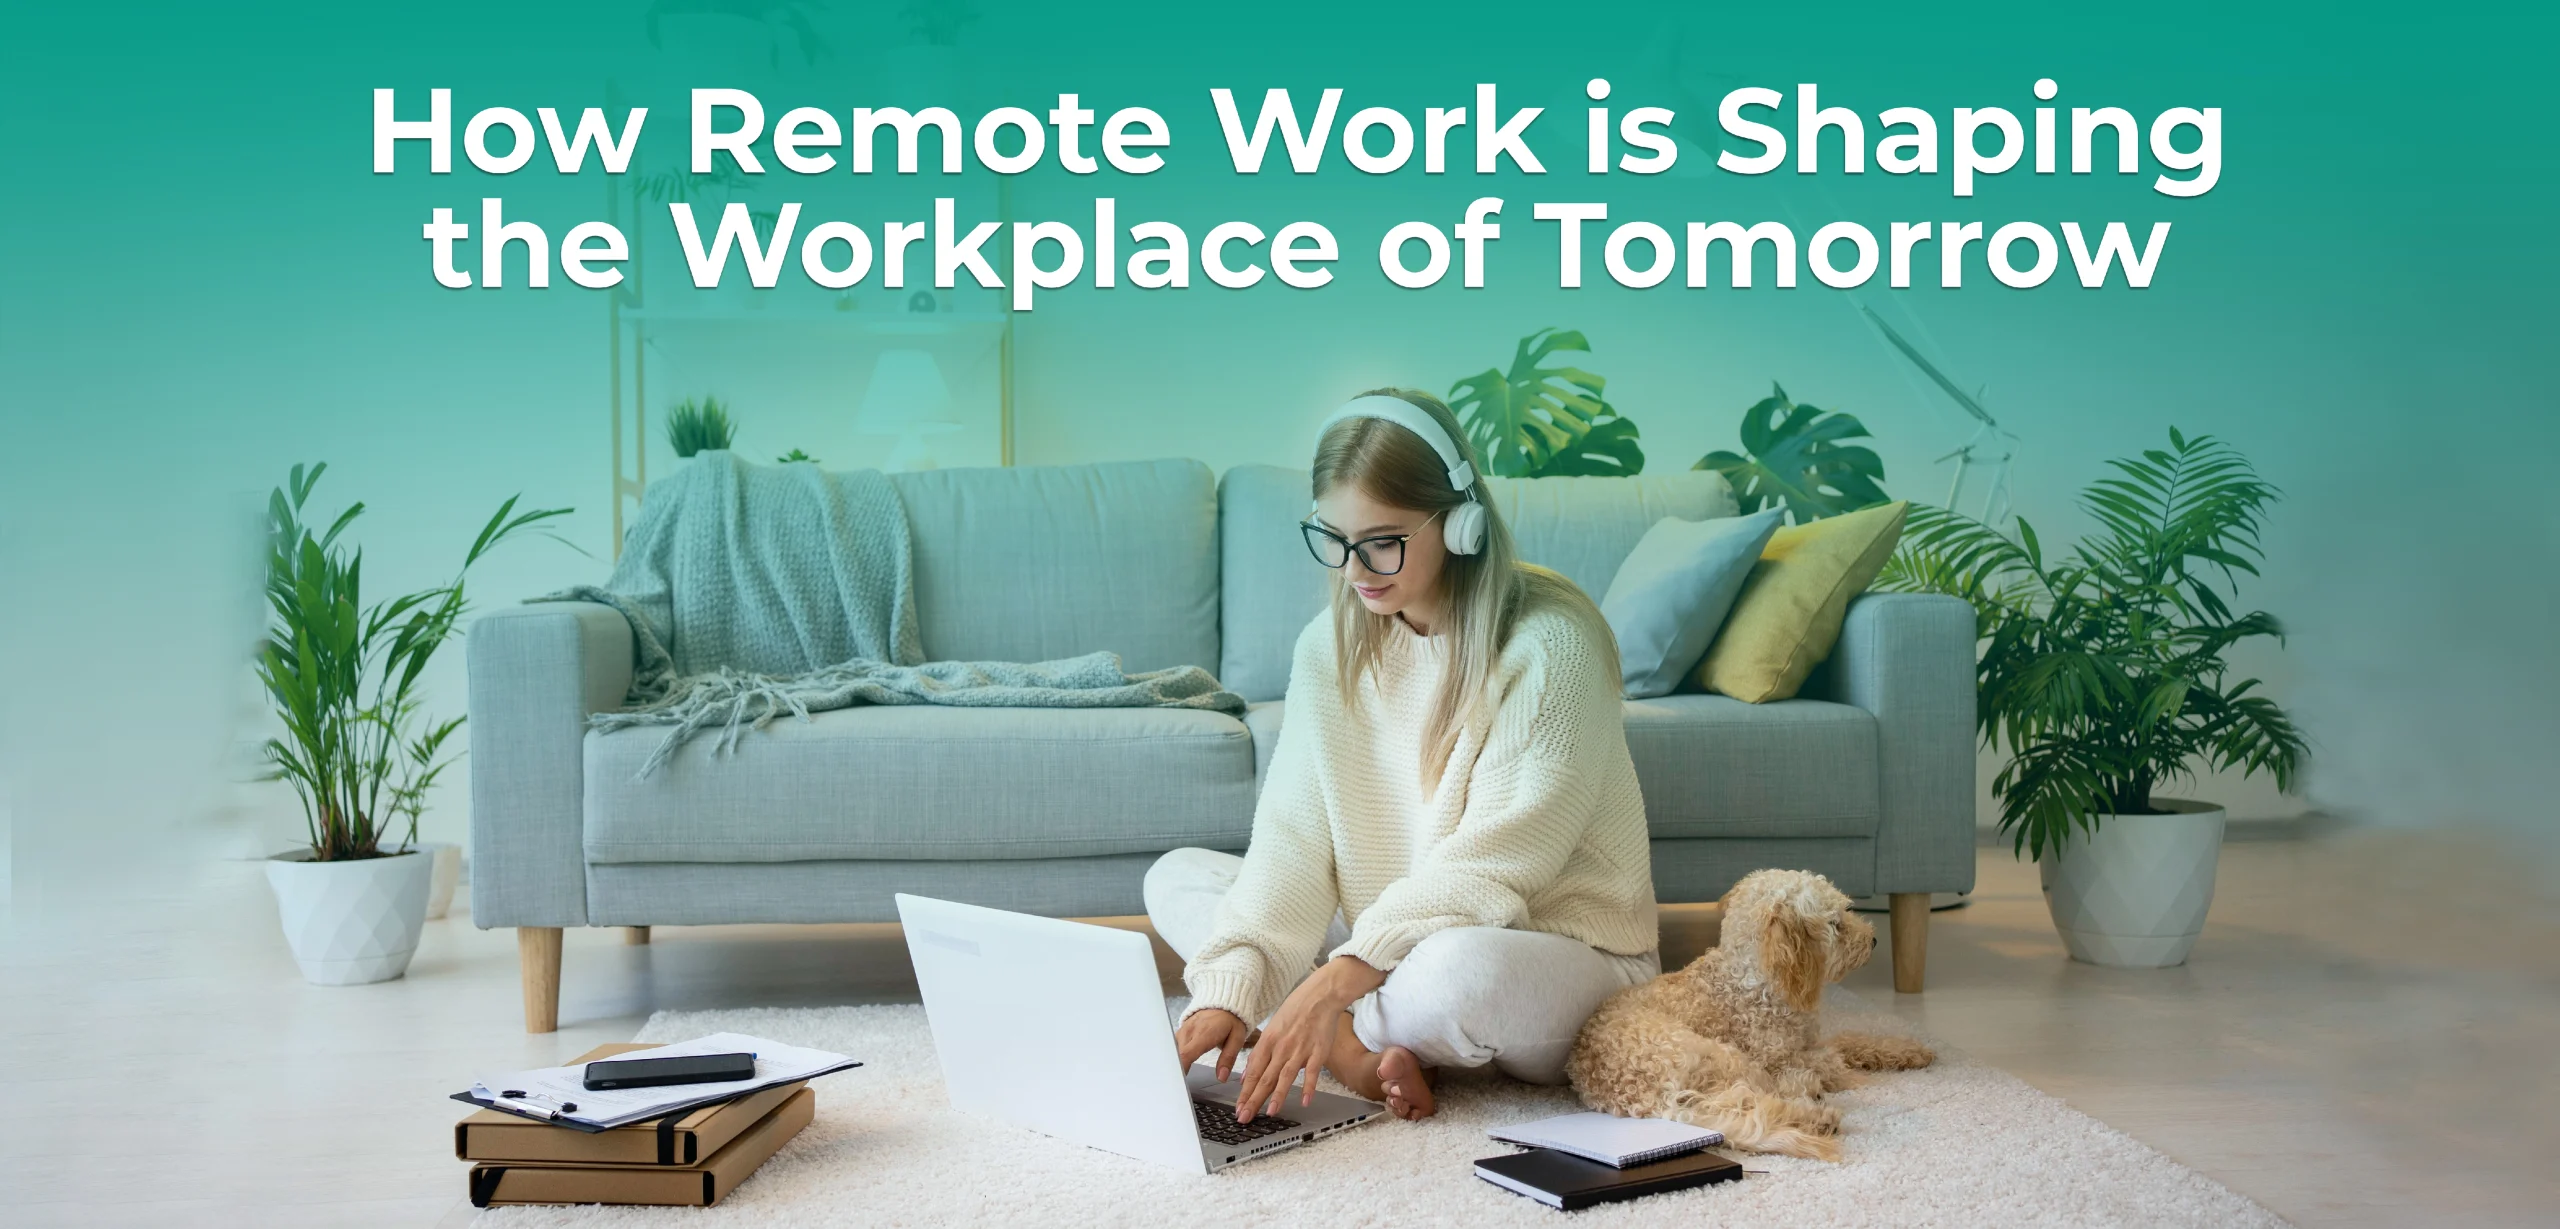 How Remote Work is Shaping the Workplace of Tomorrow